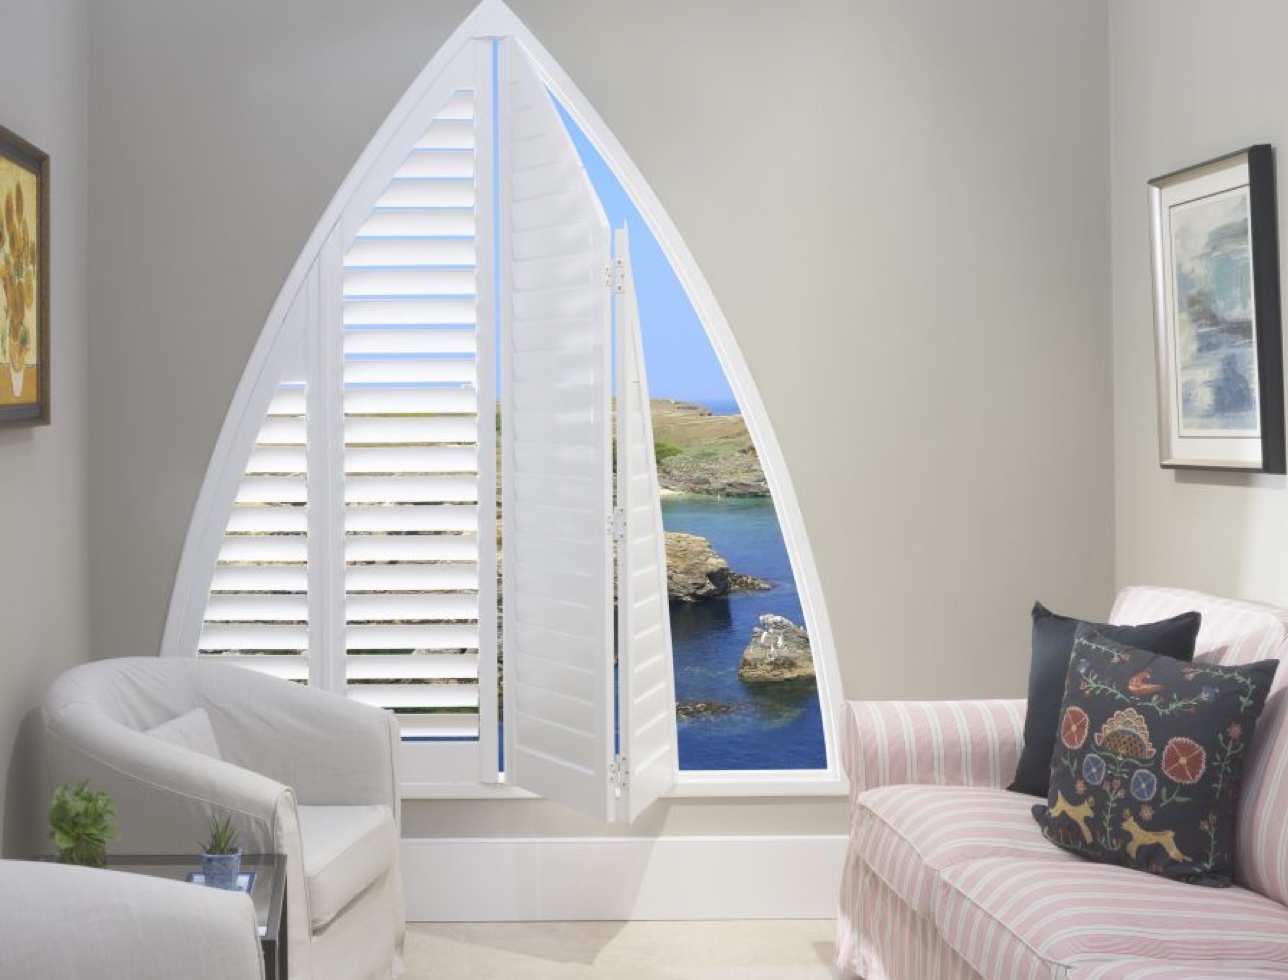 Penrith's leading blinds and shutters